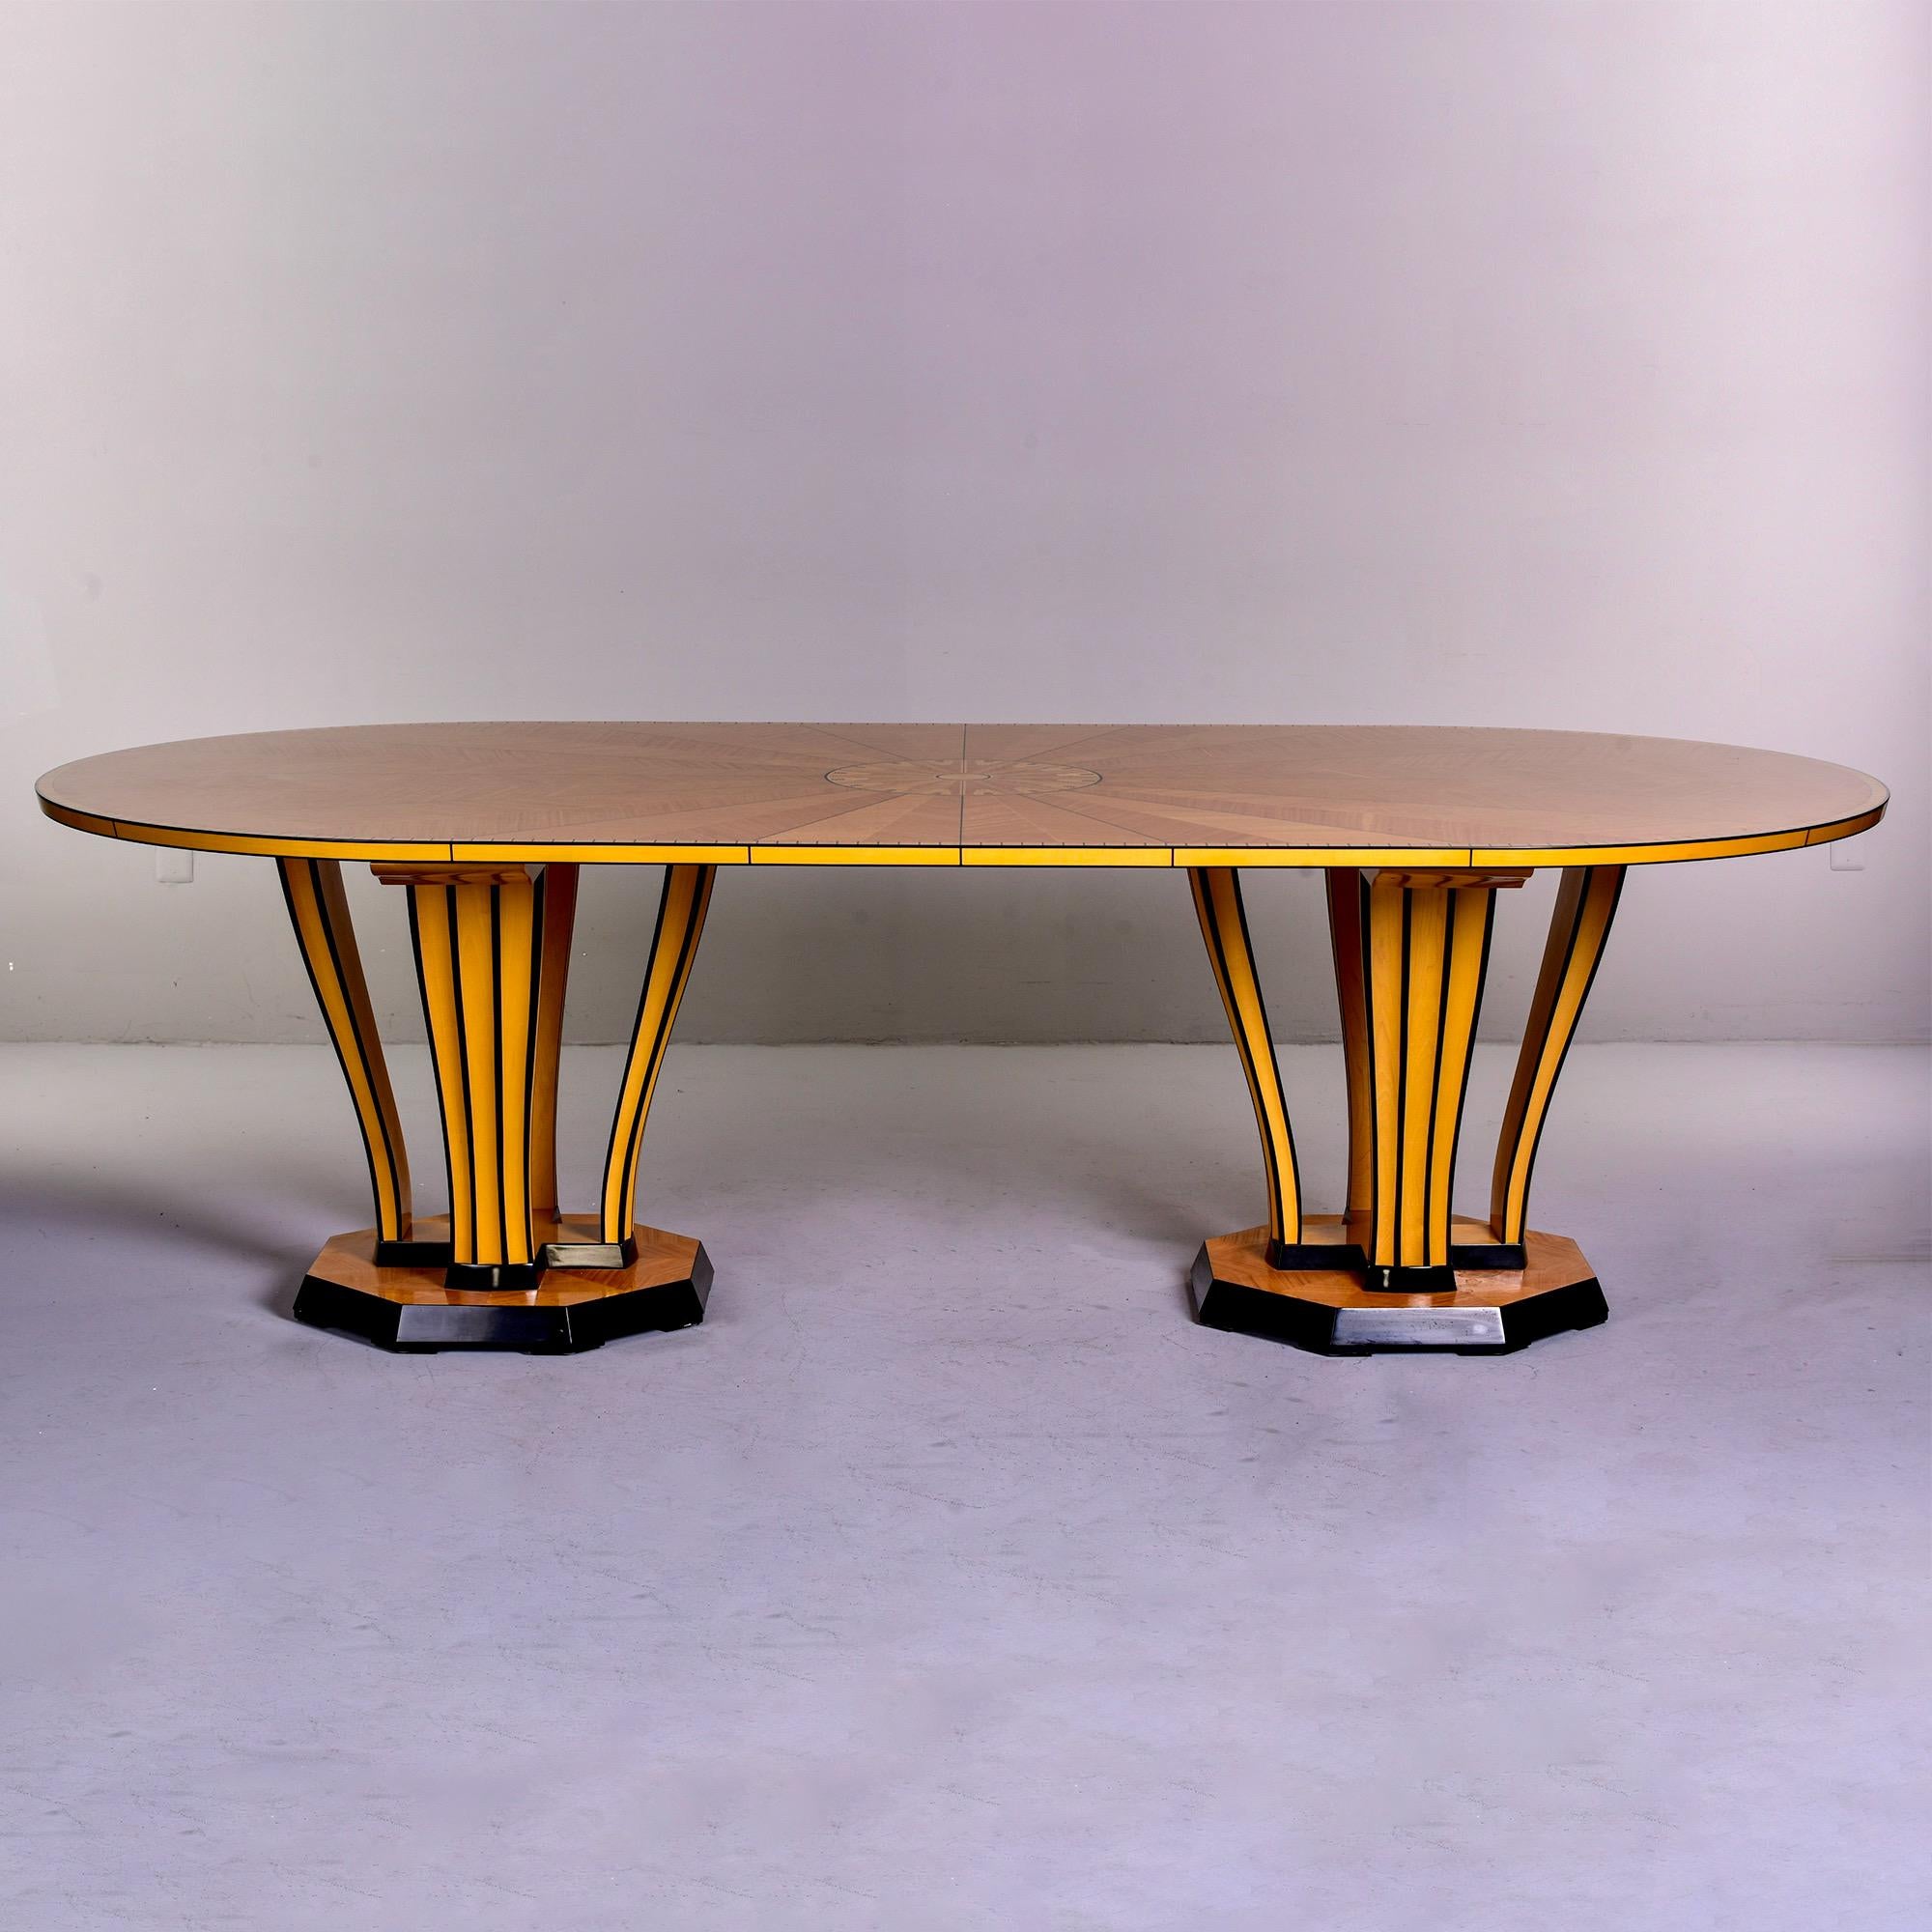 Manufactured by Charles Phipps & Sons in 1990, this is a licensed production of Eliel Saarinen's circa 1929 design. This large oval table has a double pedestal base with a dramatic sunburst inlay pattern. Made of maple with limba, ramin and ebonised